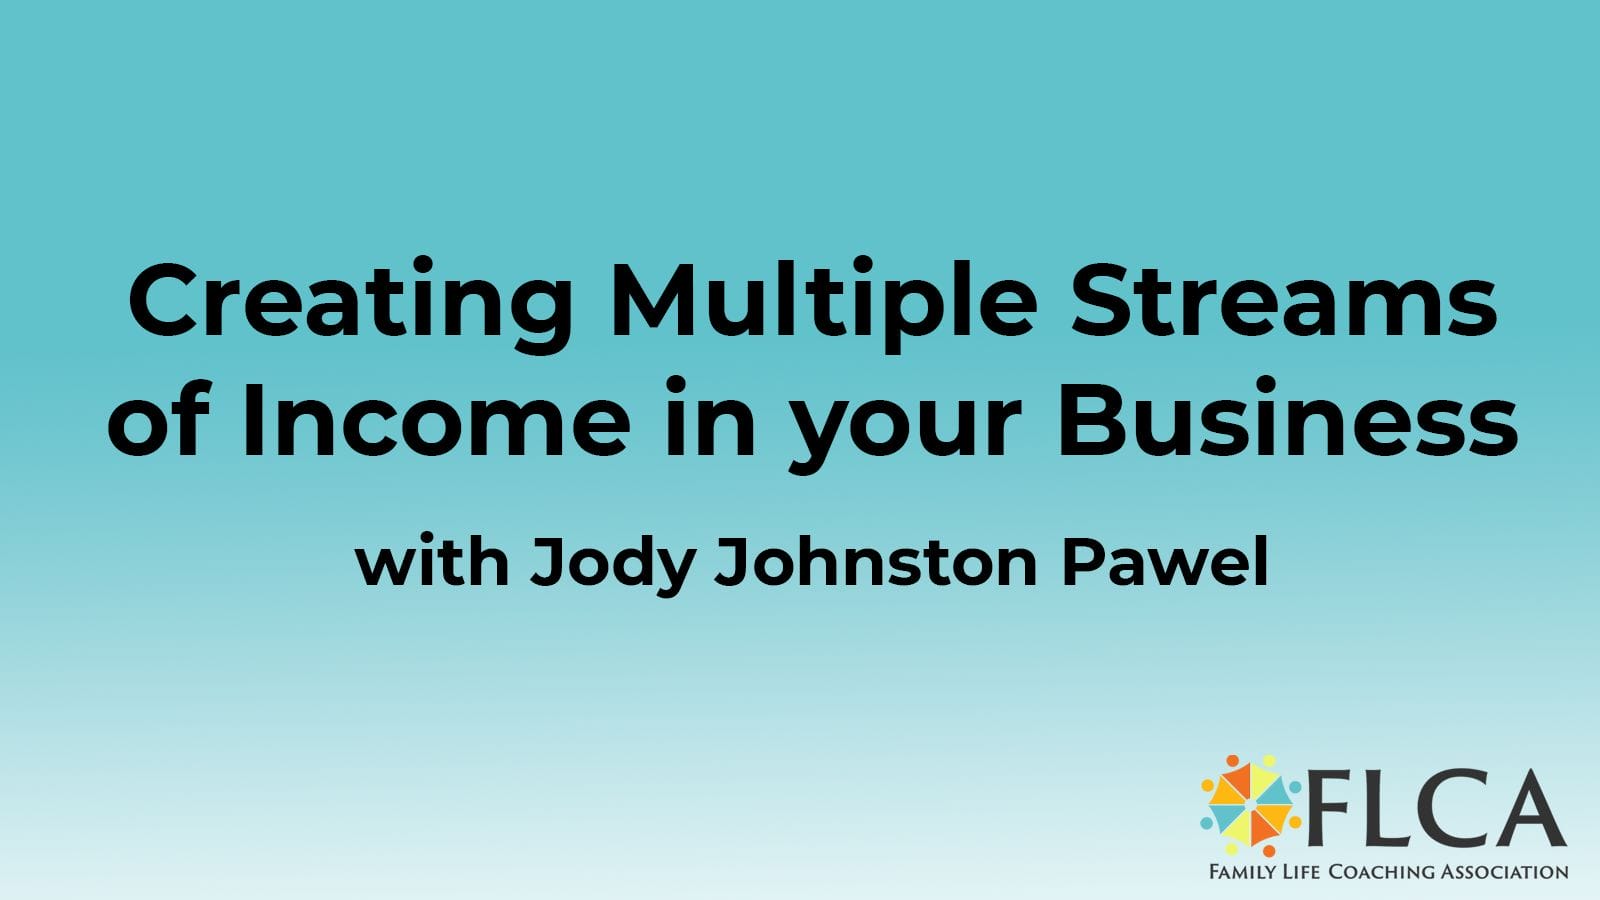 Creating Multiple Streams of Income in your Business